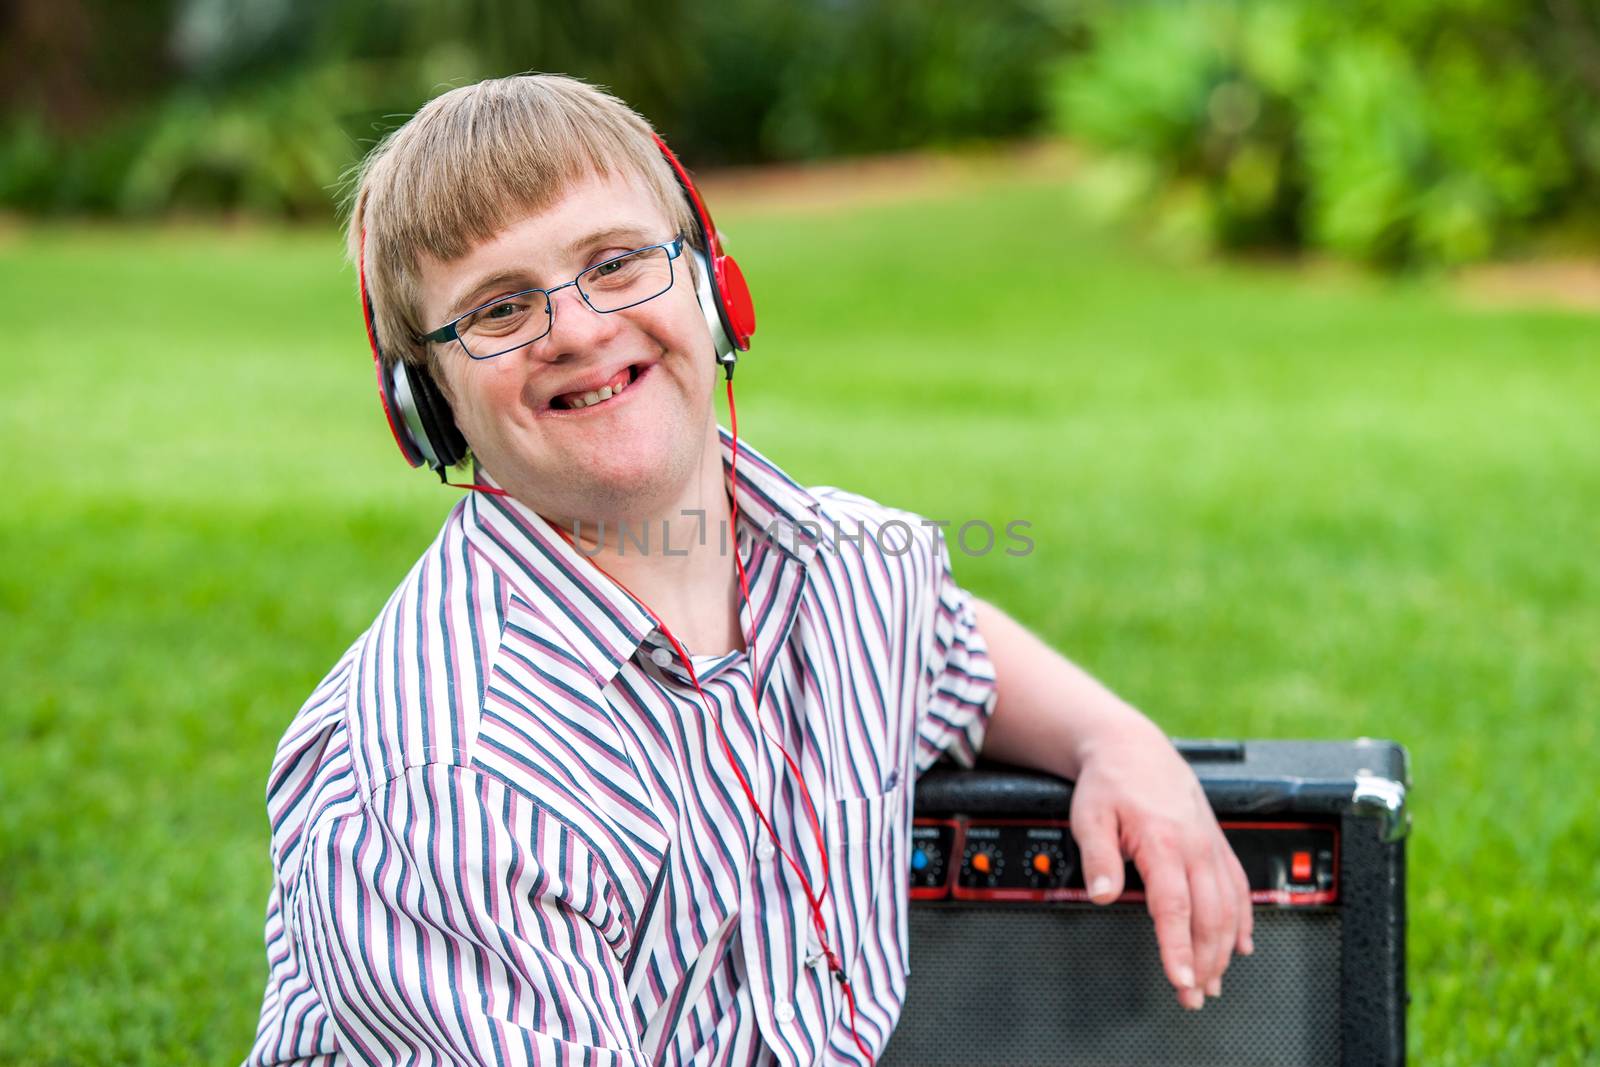 Close up portrait of young man with down syndrome wearing headphones outdoors.
